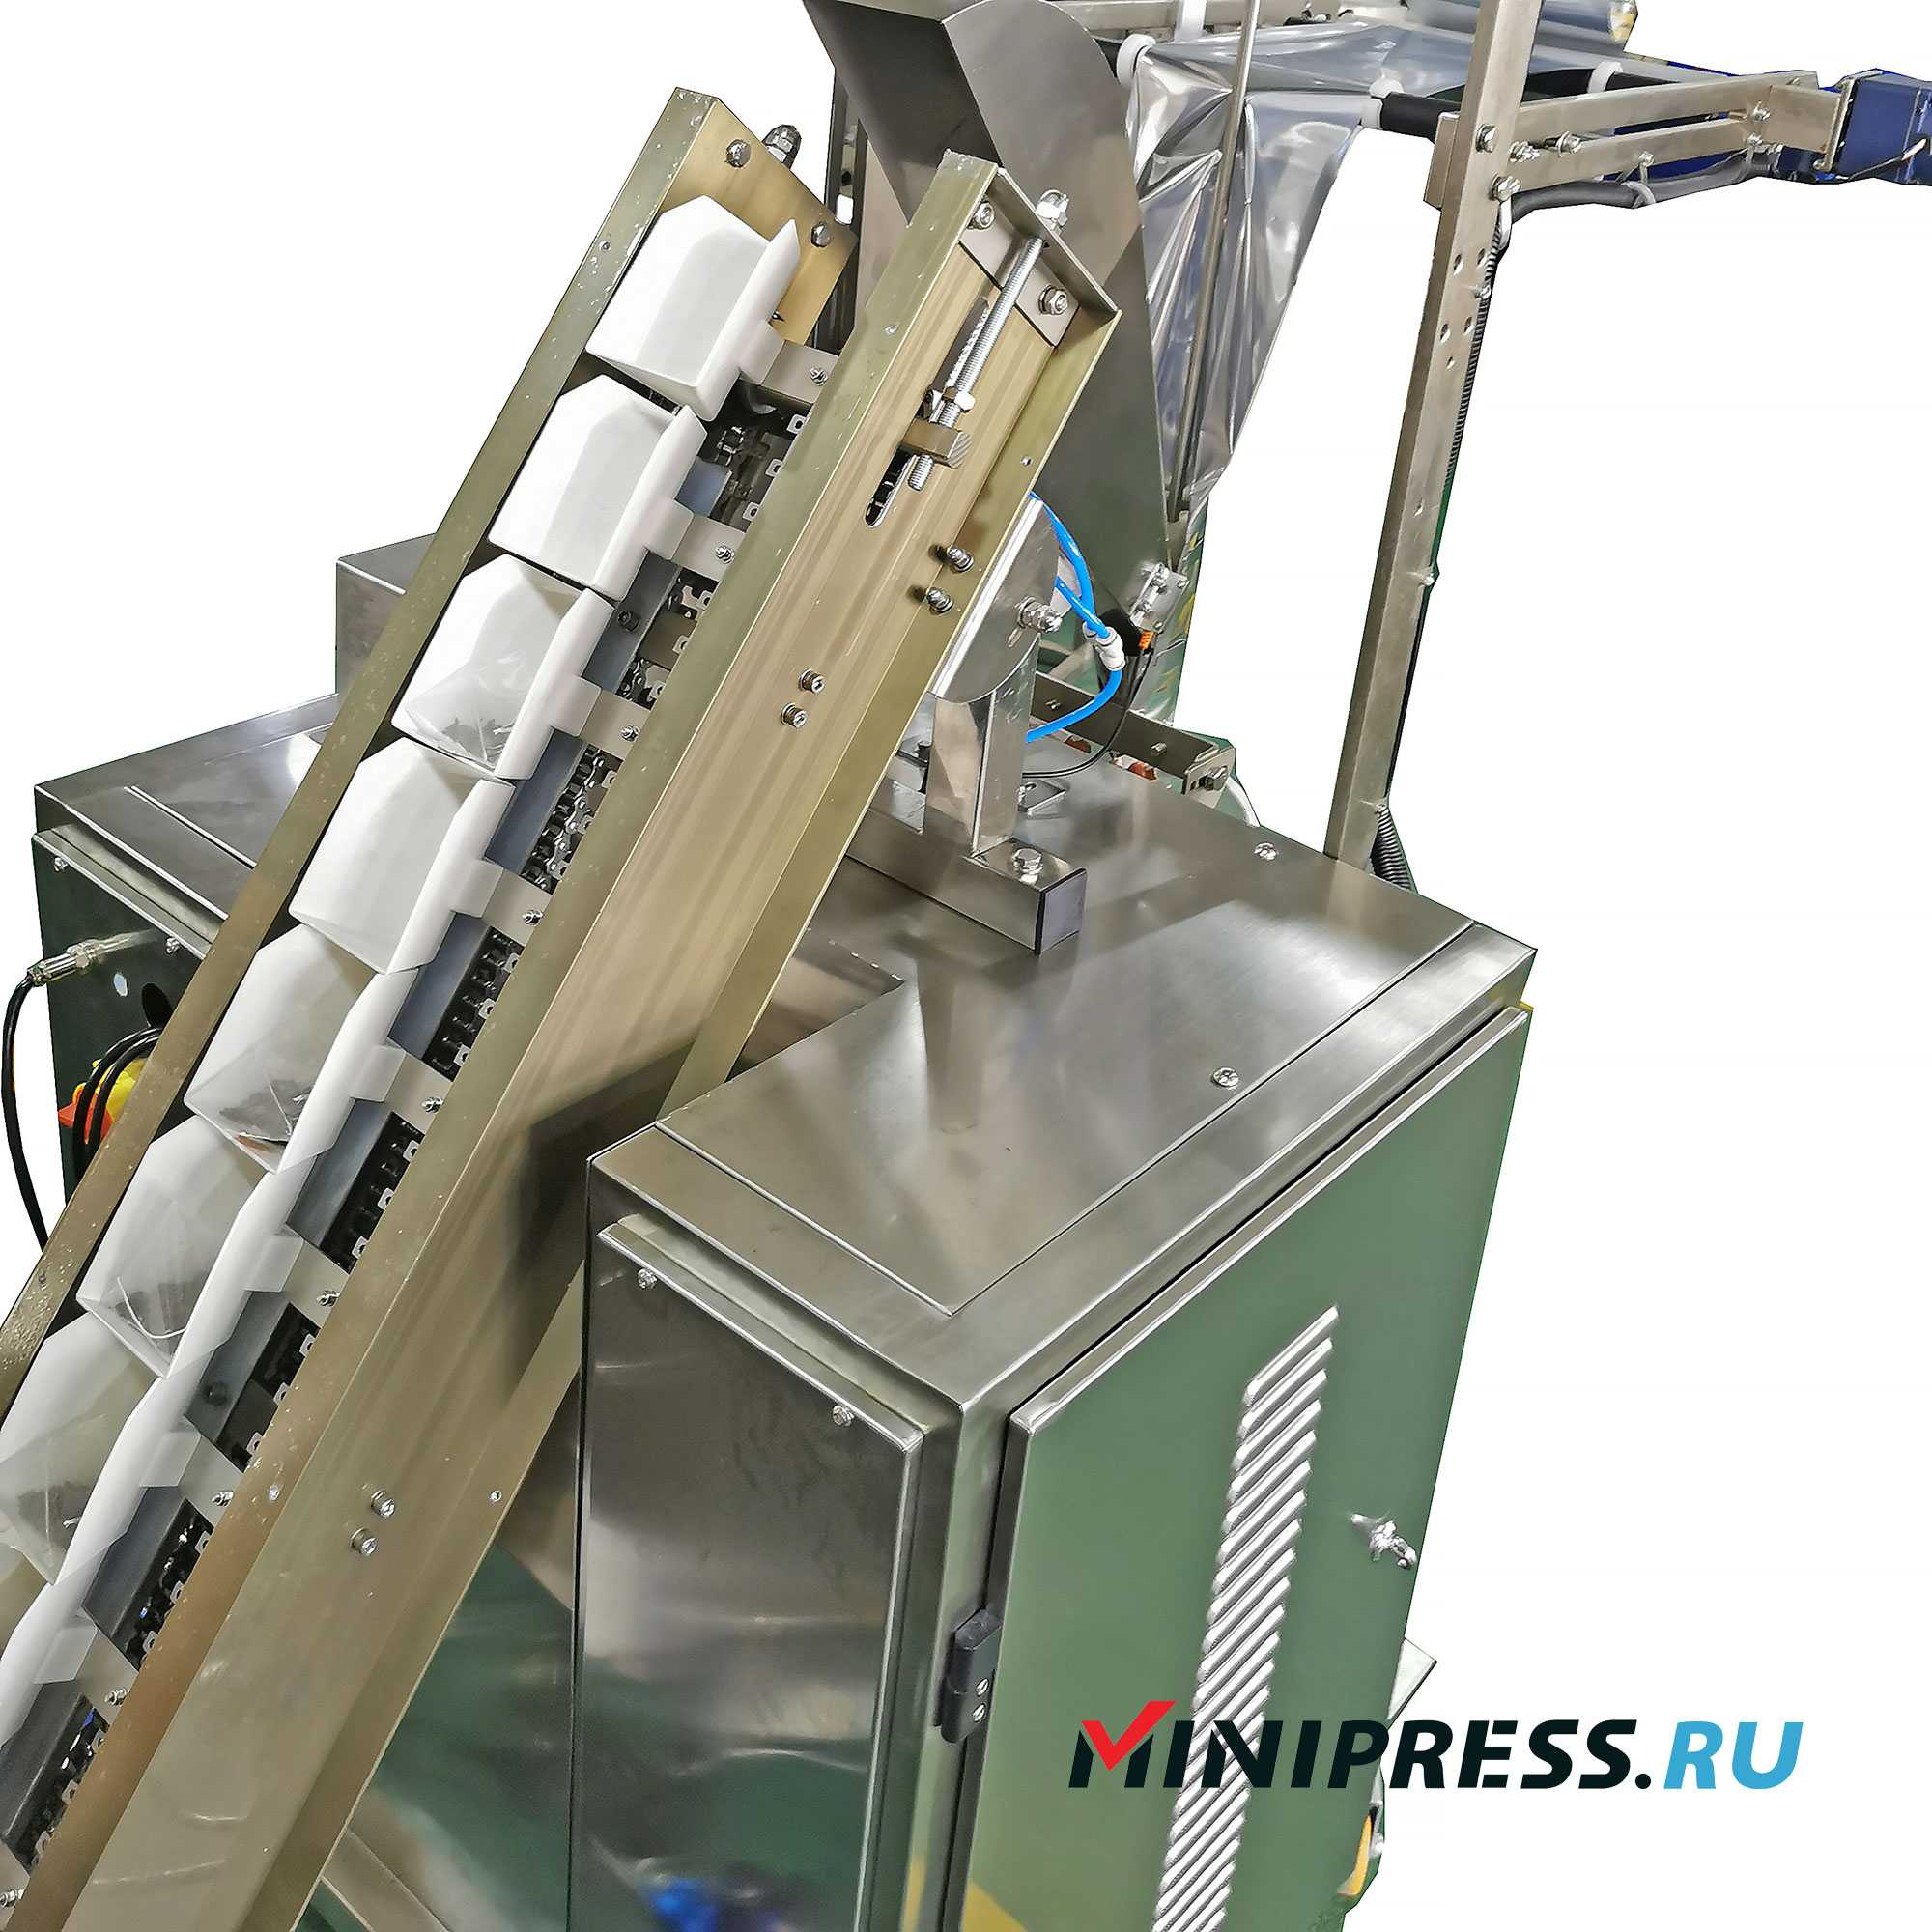 Tea packaging line in nylon pyramid and envelope for teapots TC-22